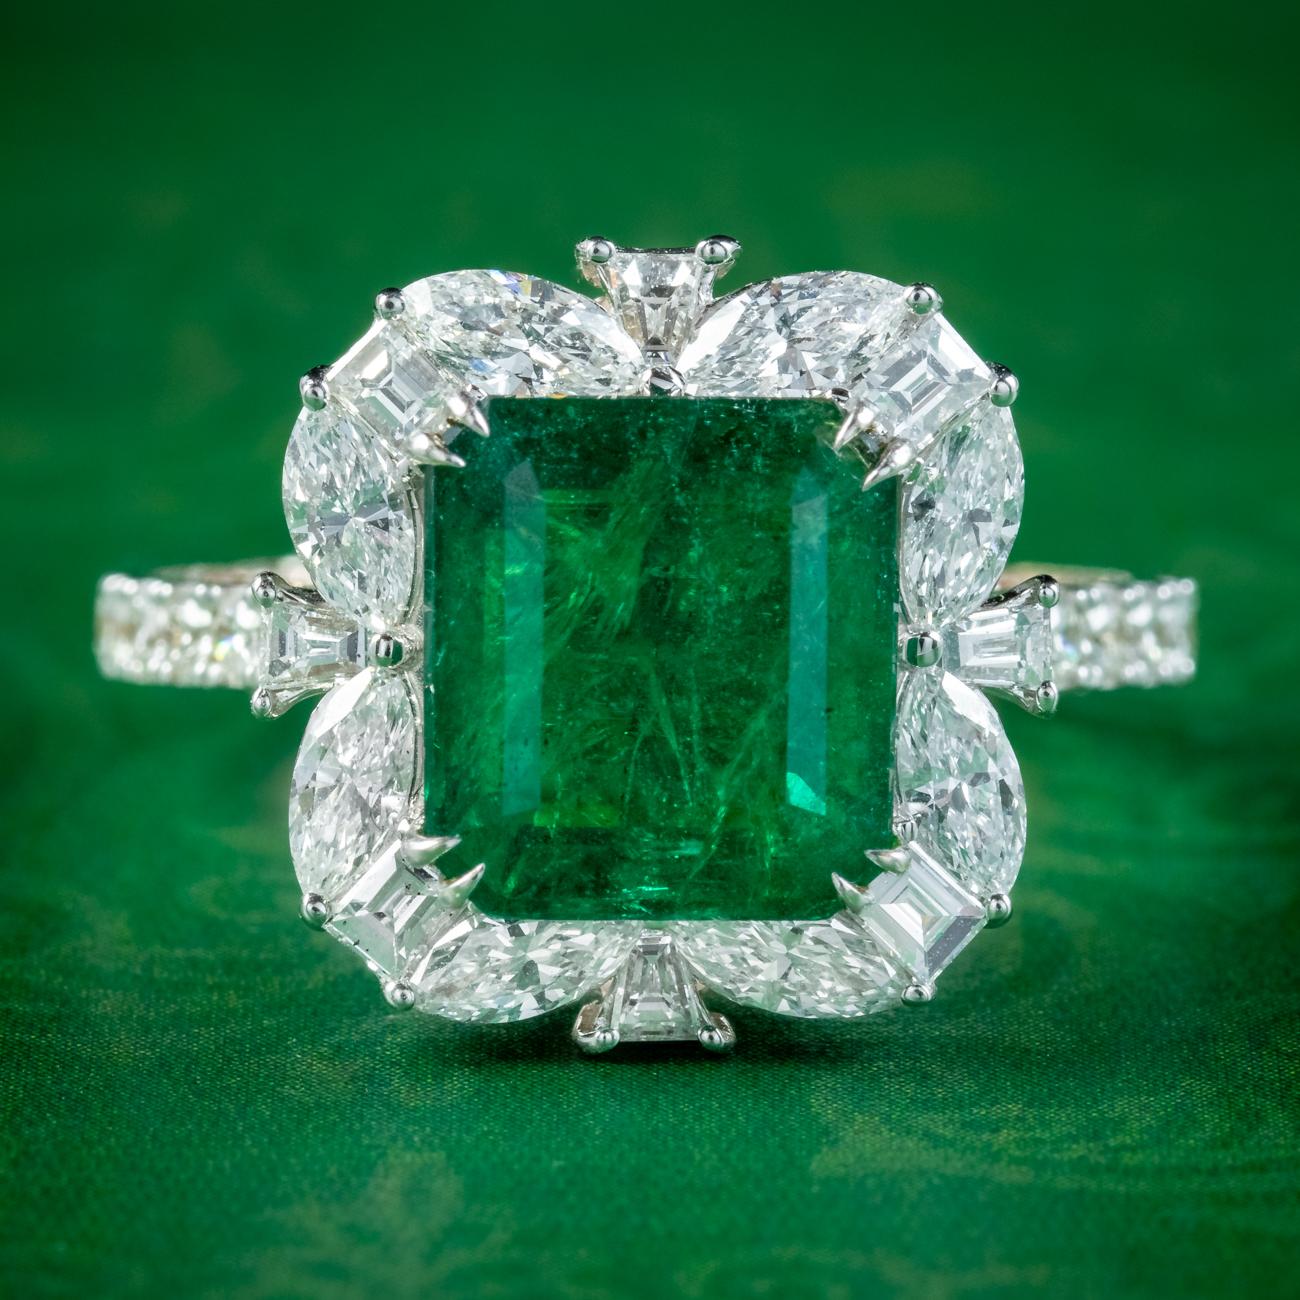 A stunning vintage cluster ring adorned with a beautiful, Brazilian step cut emerald with a particularly vivid, deep green hue. It has been tested as natural and weighed at 3.11 carats. 

The emerald is complemented by a frame of bright, clean